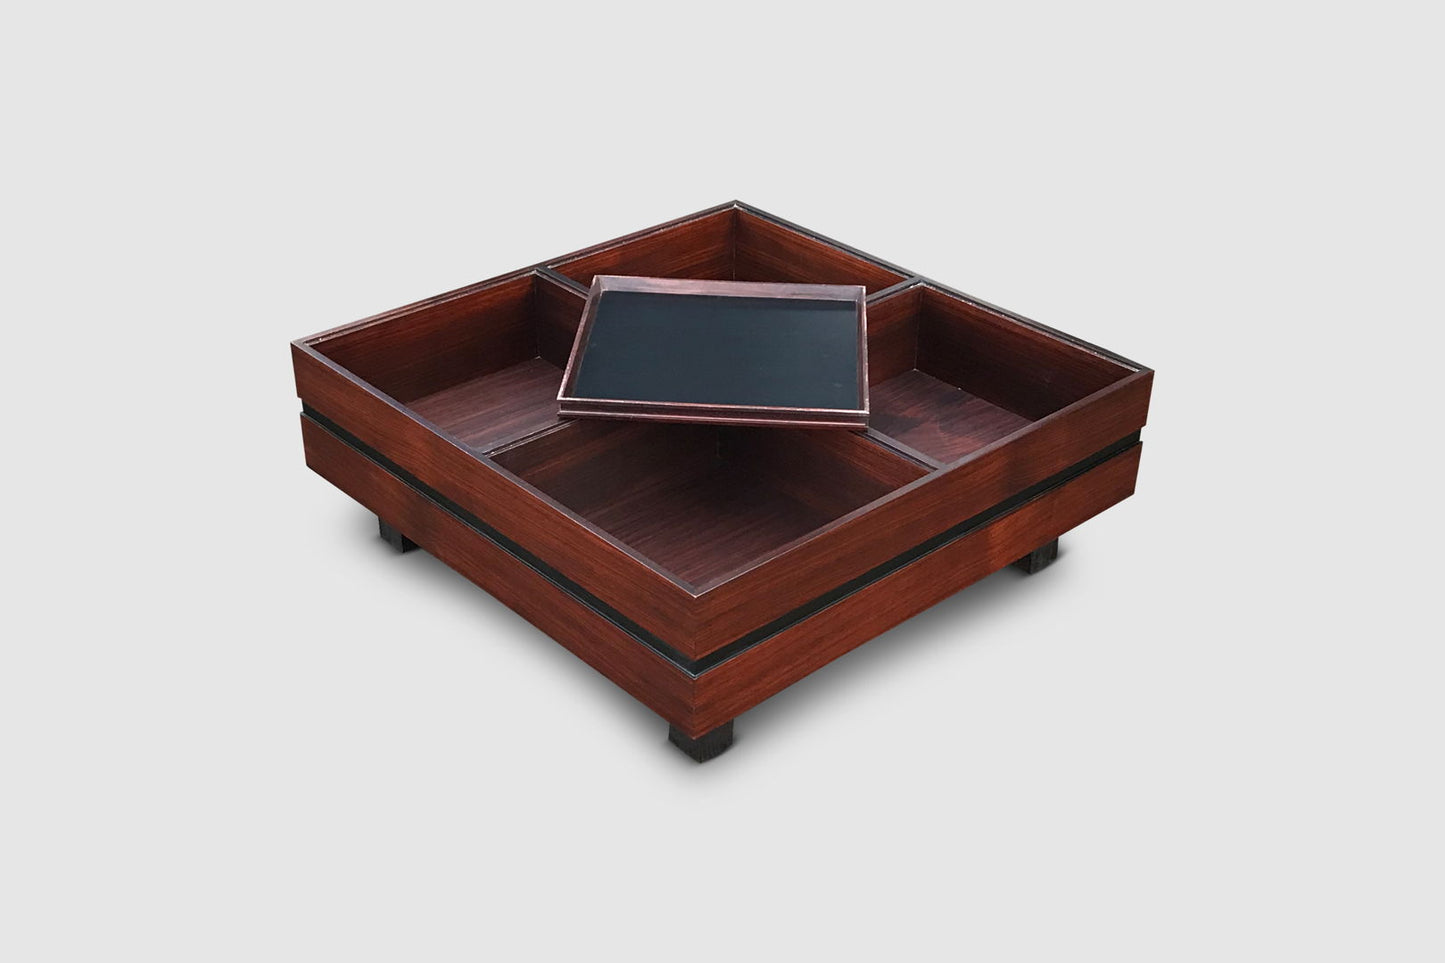 Compartmented Teak Coffee Table by Carlo Hauner for Forma Italy 1960s